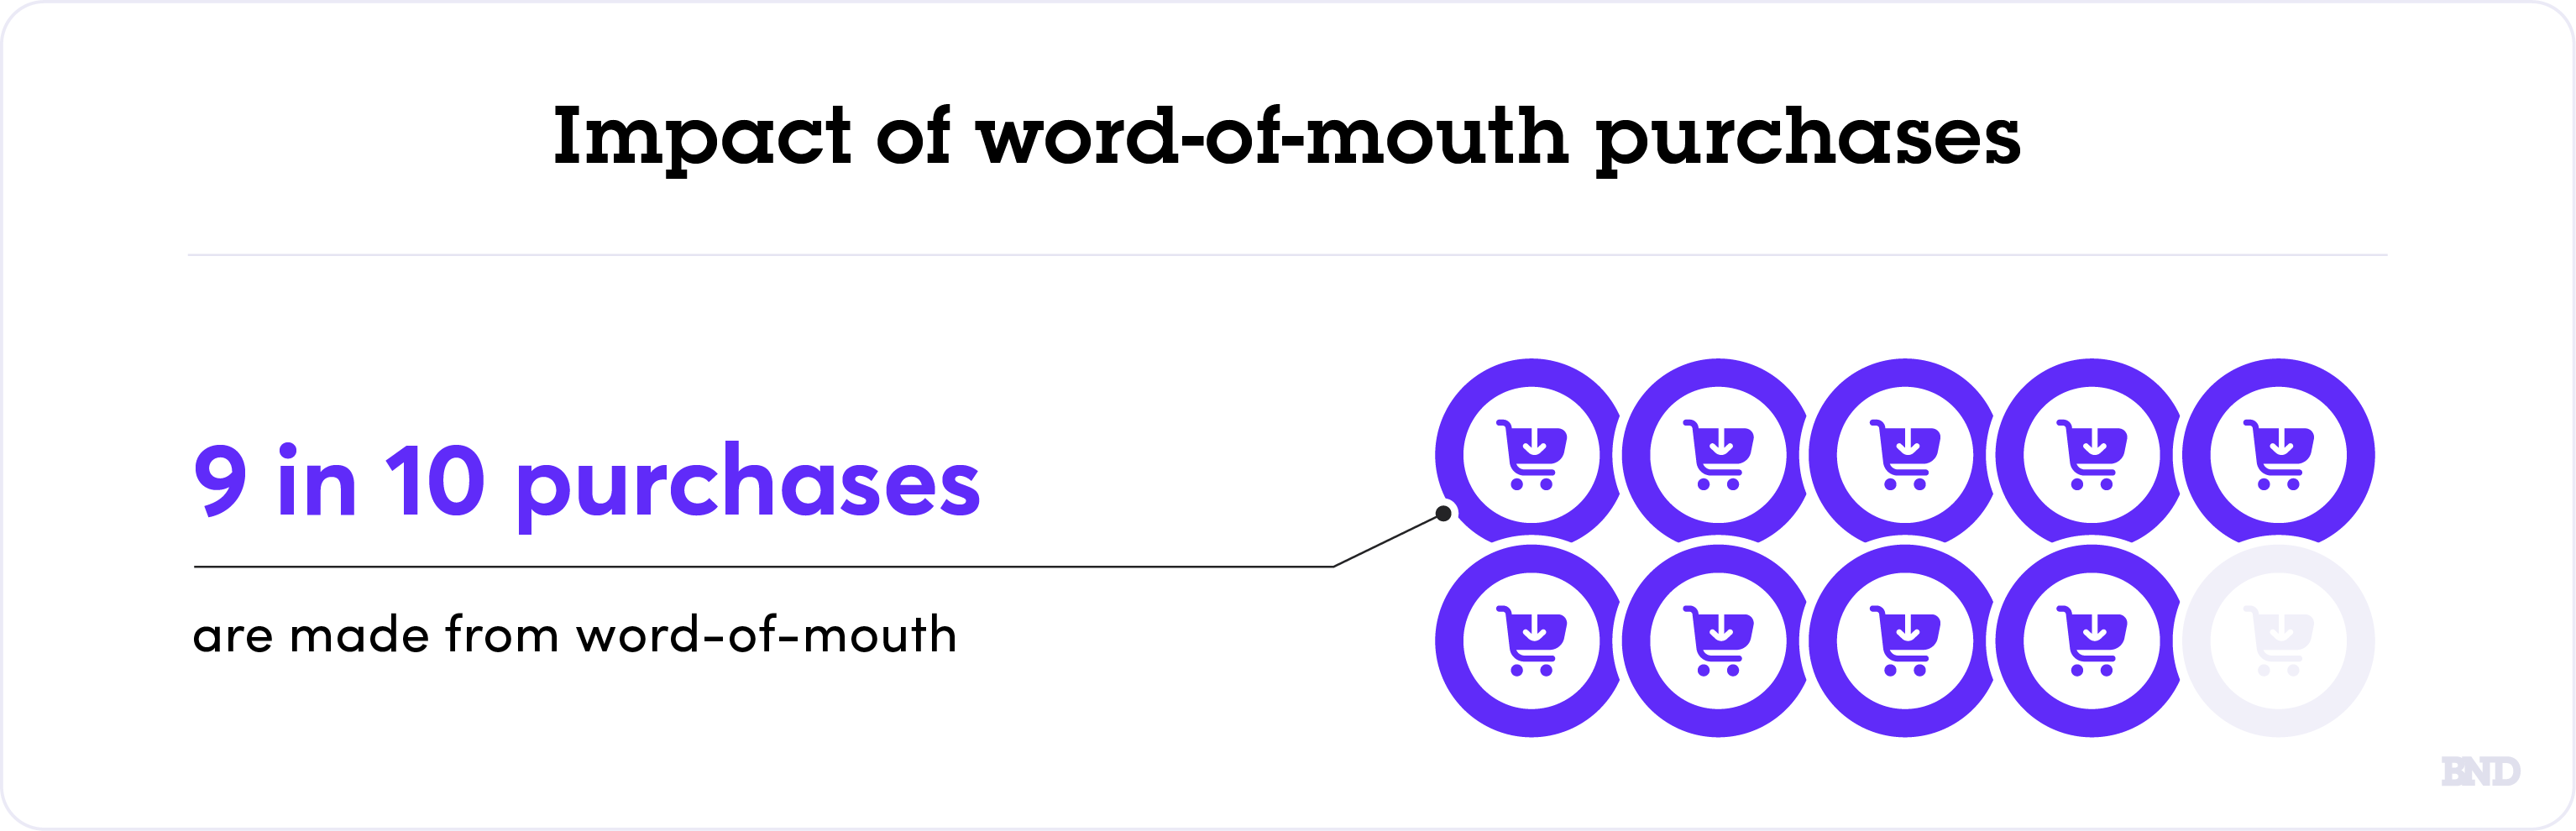 Word of mouth 9 out of 10 purchases graph